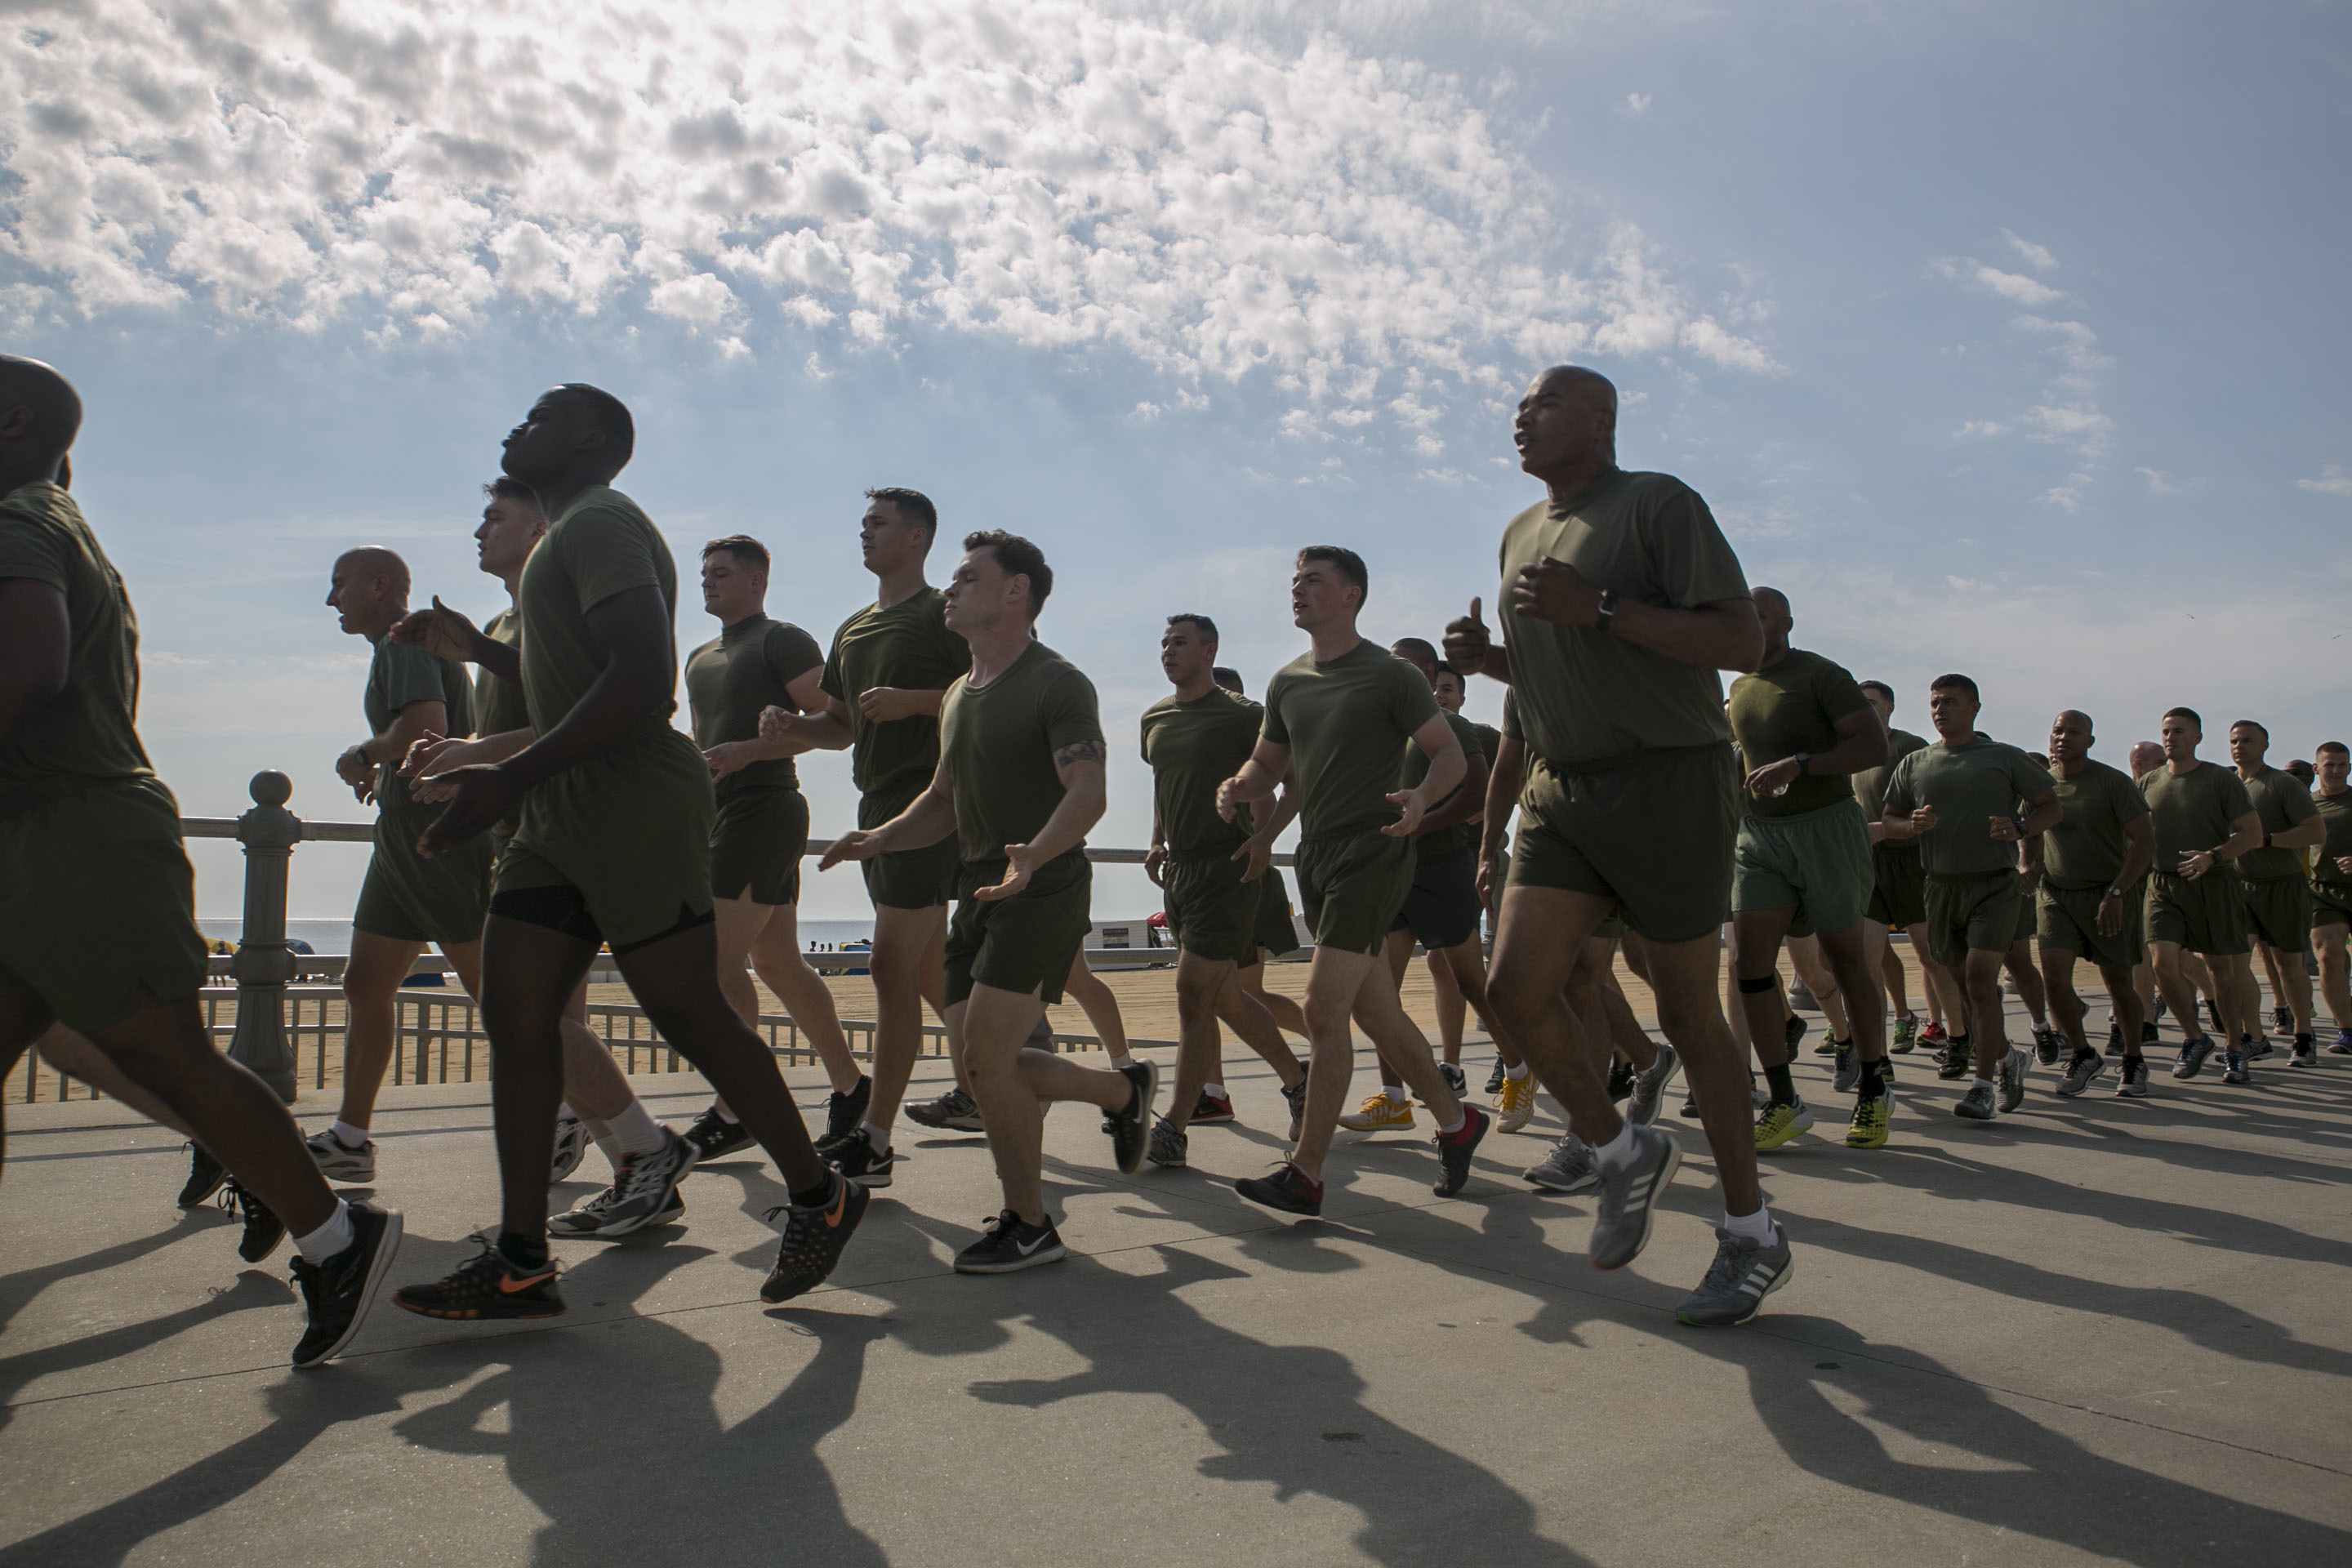 Listen to this comedian's hilarious take on military running cadence